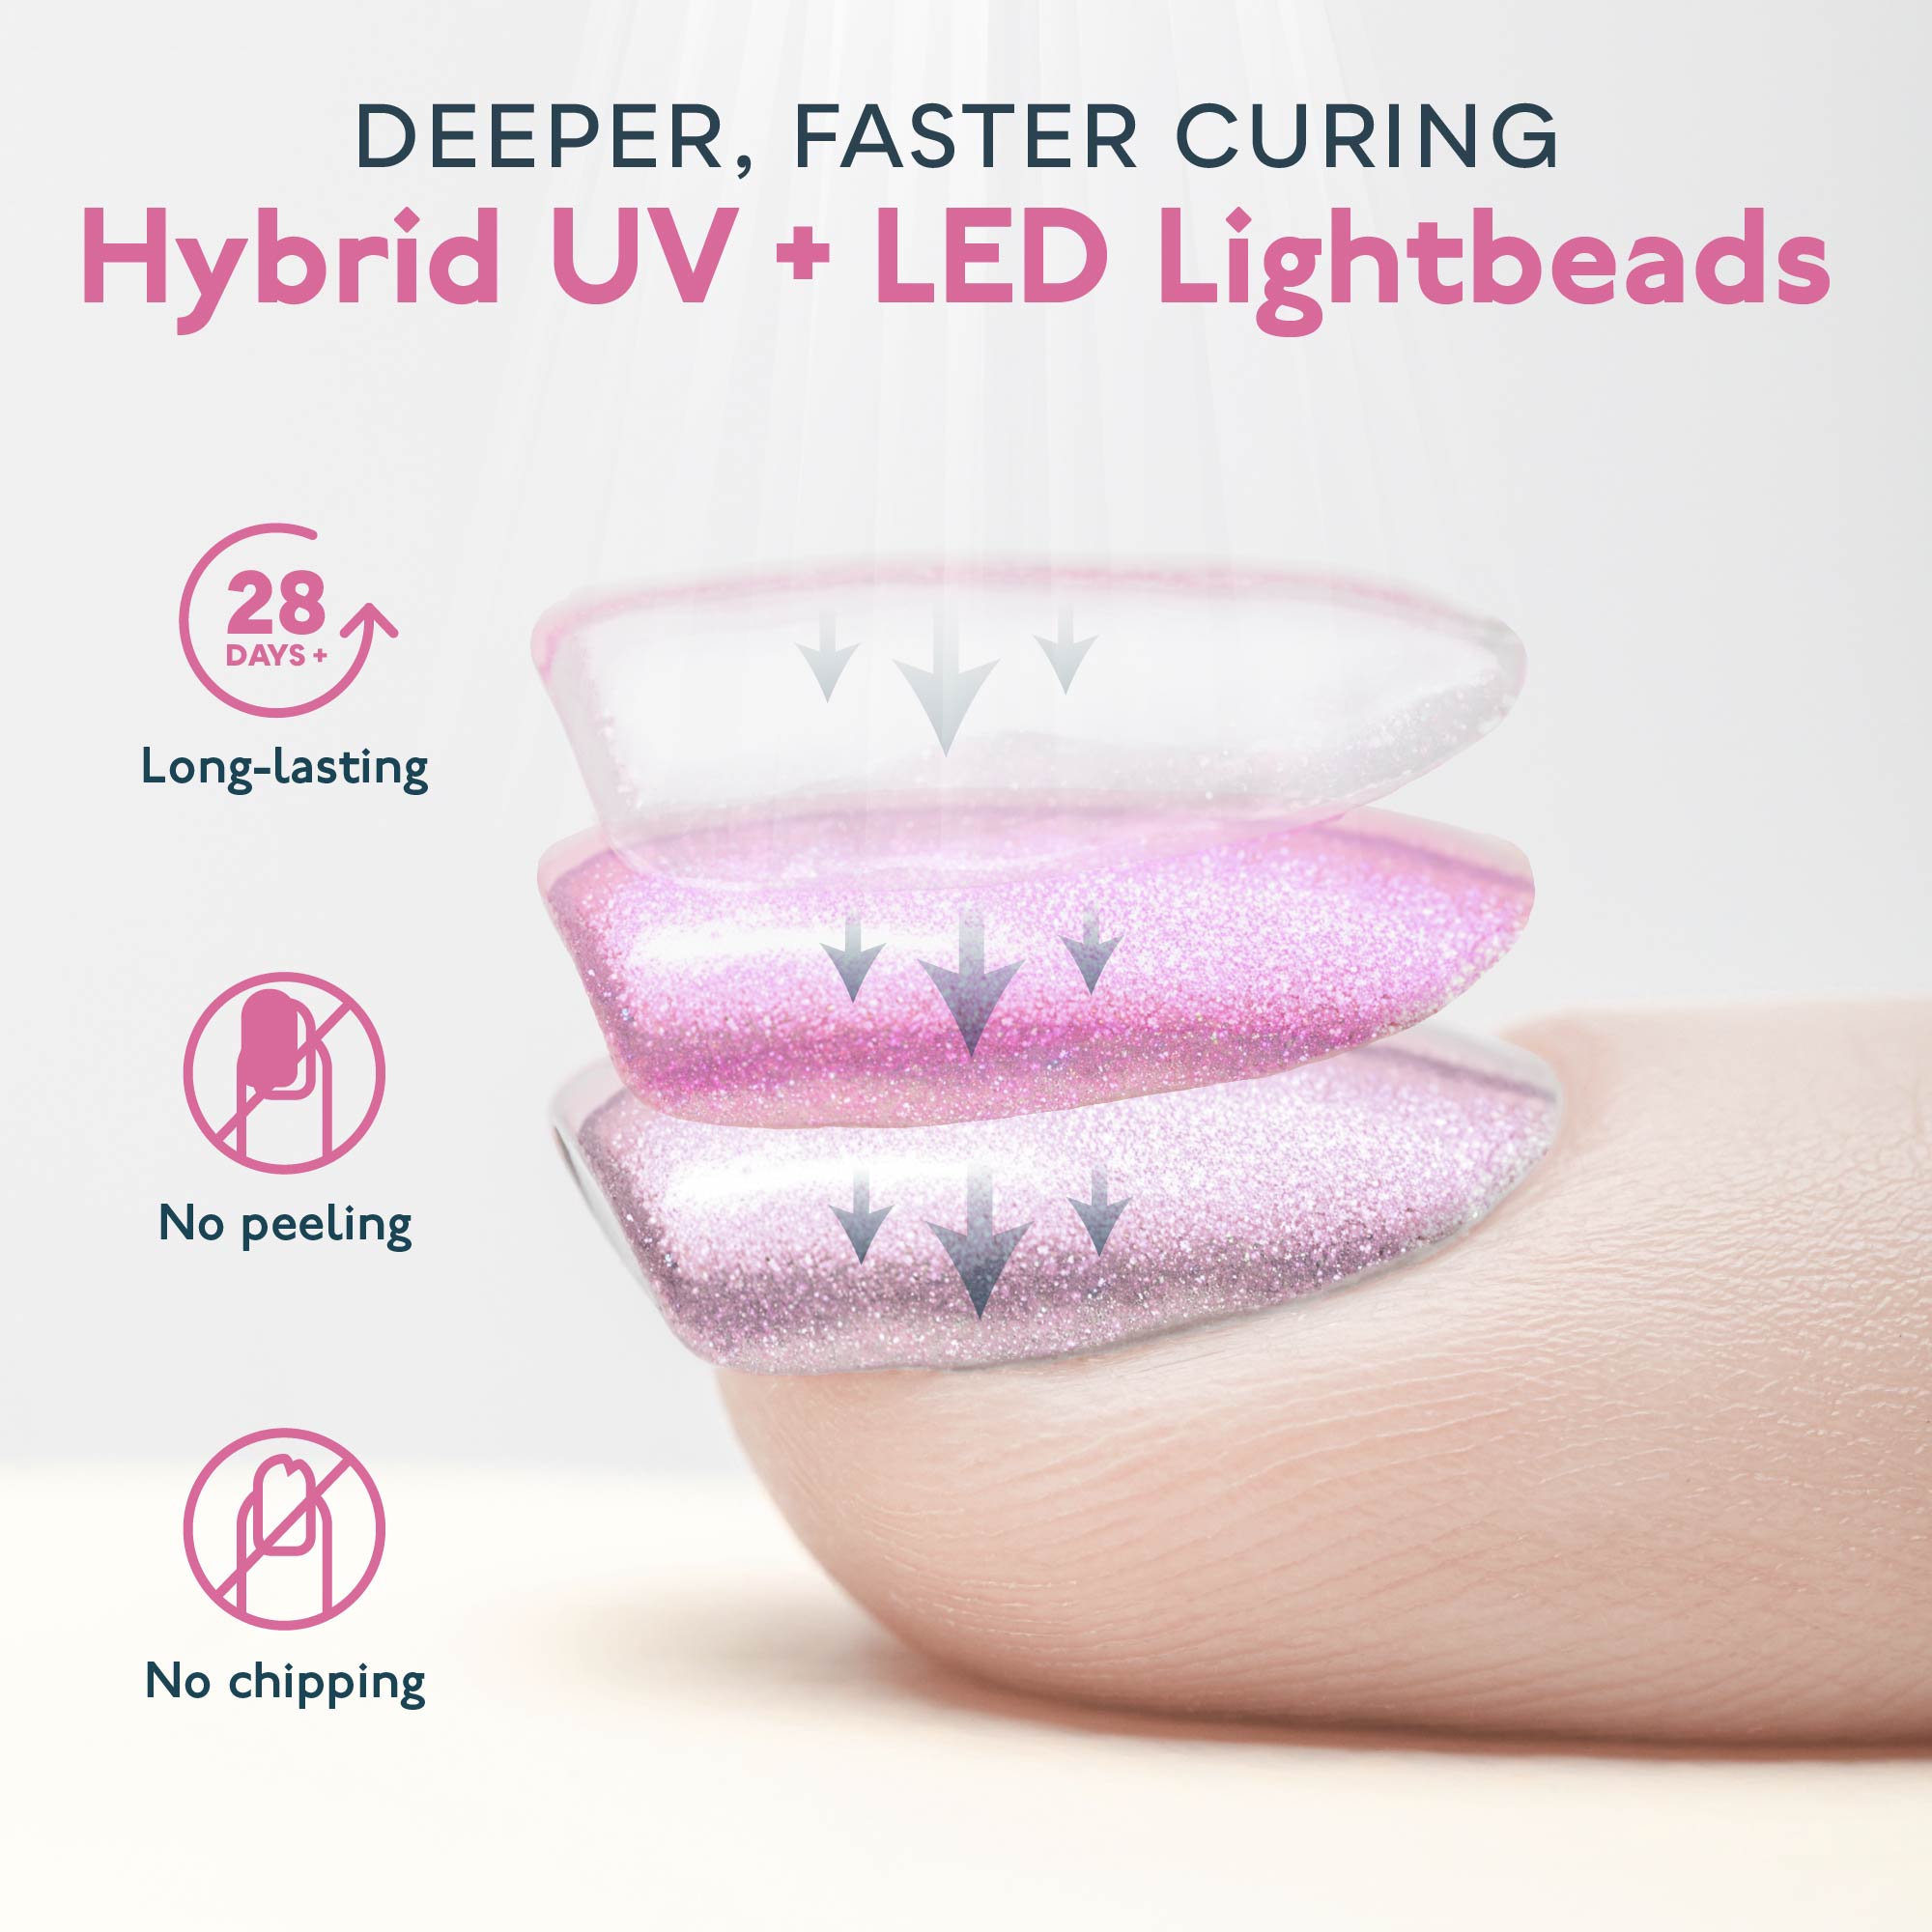 Fast, Even, and Portable Nail Curing: Sun5 UV LED Lamp